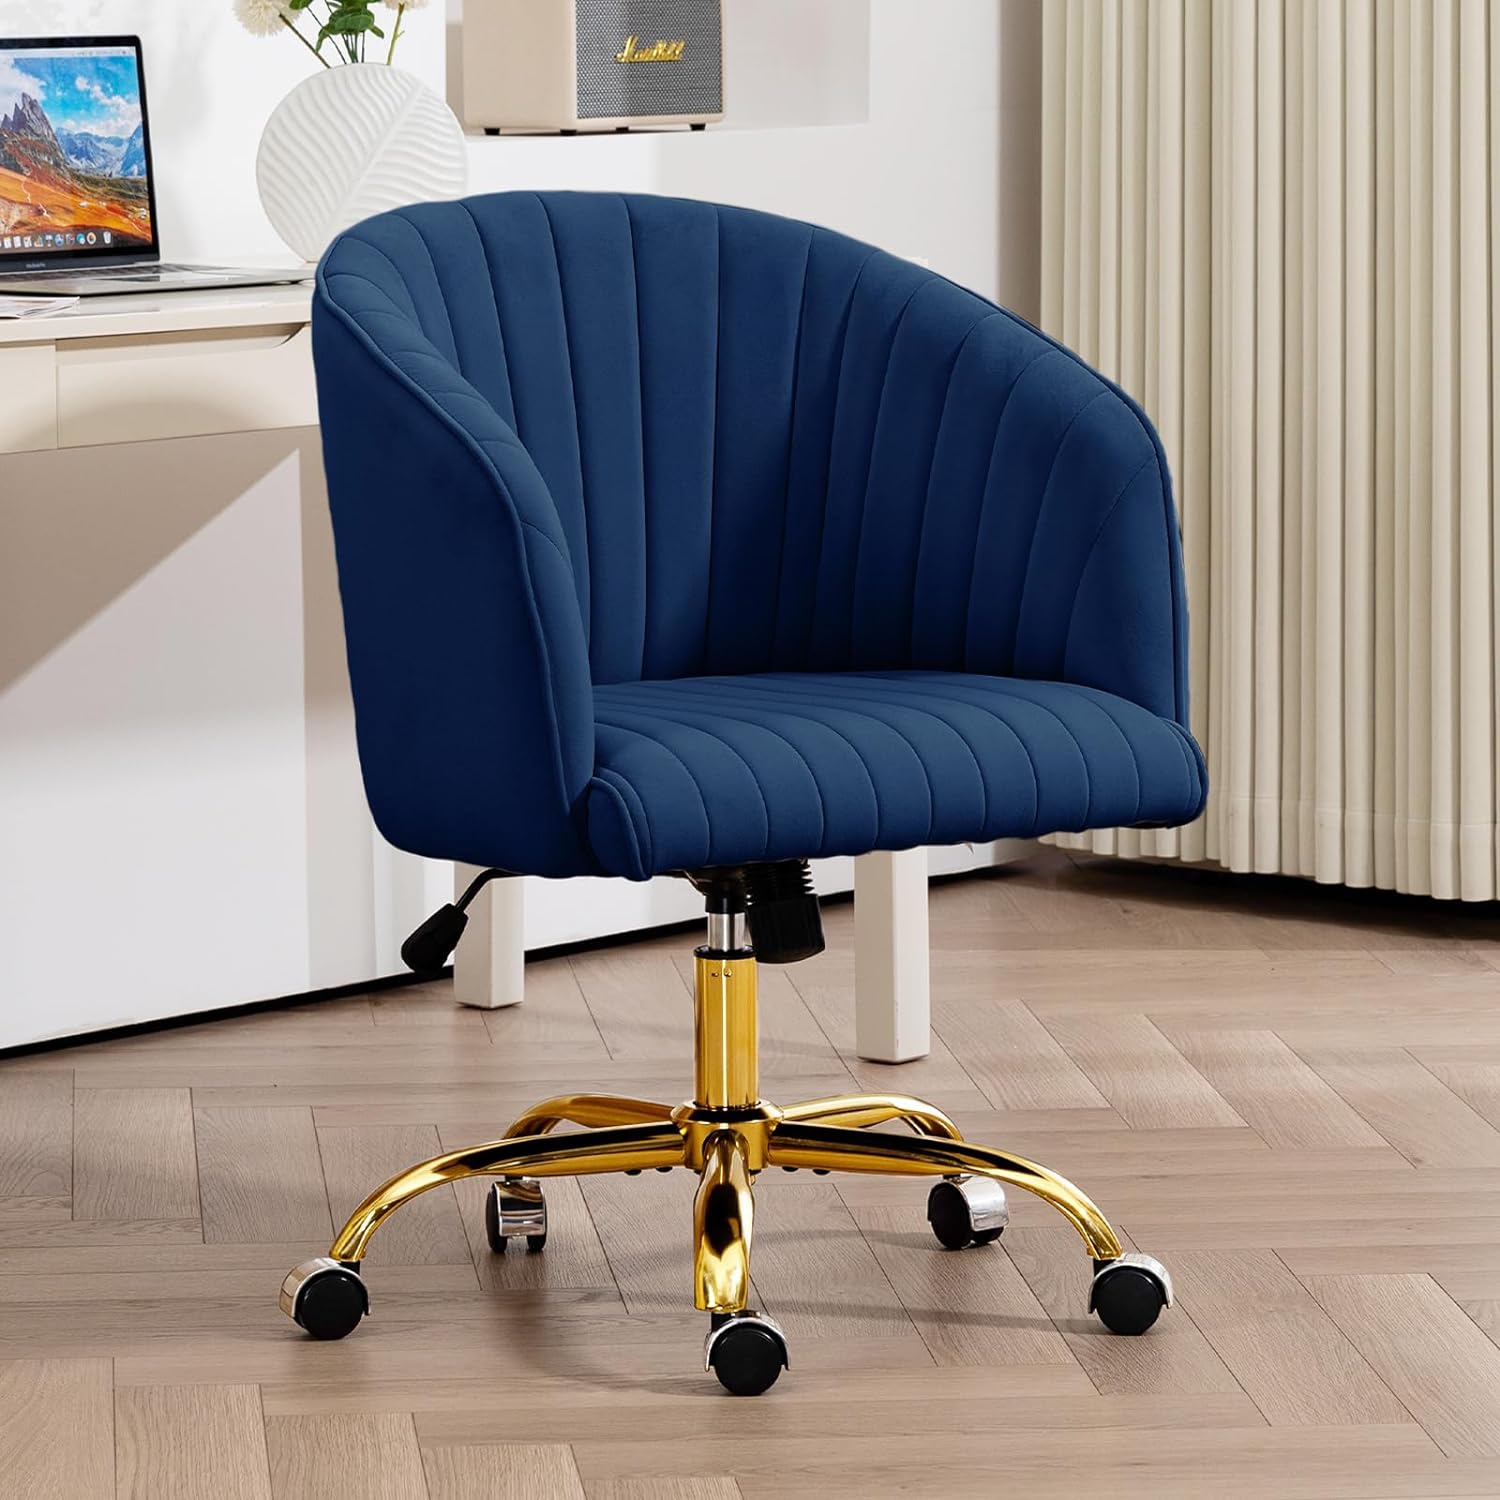 Comfy Velvet Office Chair, Modern Height Adjustable Home Office Desk Chair with Heavy Duty Gold Base, 360 Swivel Cute Vanity Chair Ergonomic Computer Task Chair for Home Office, Navy